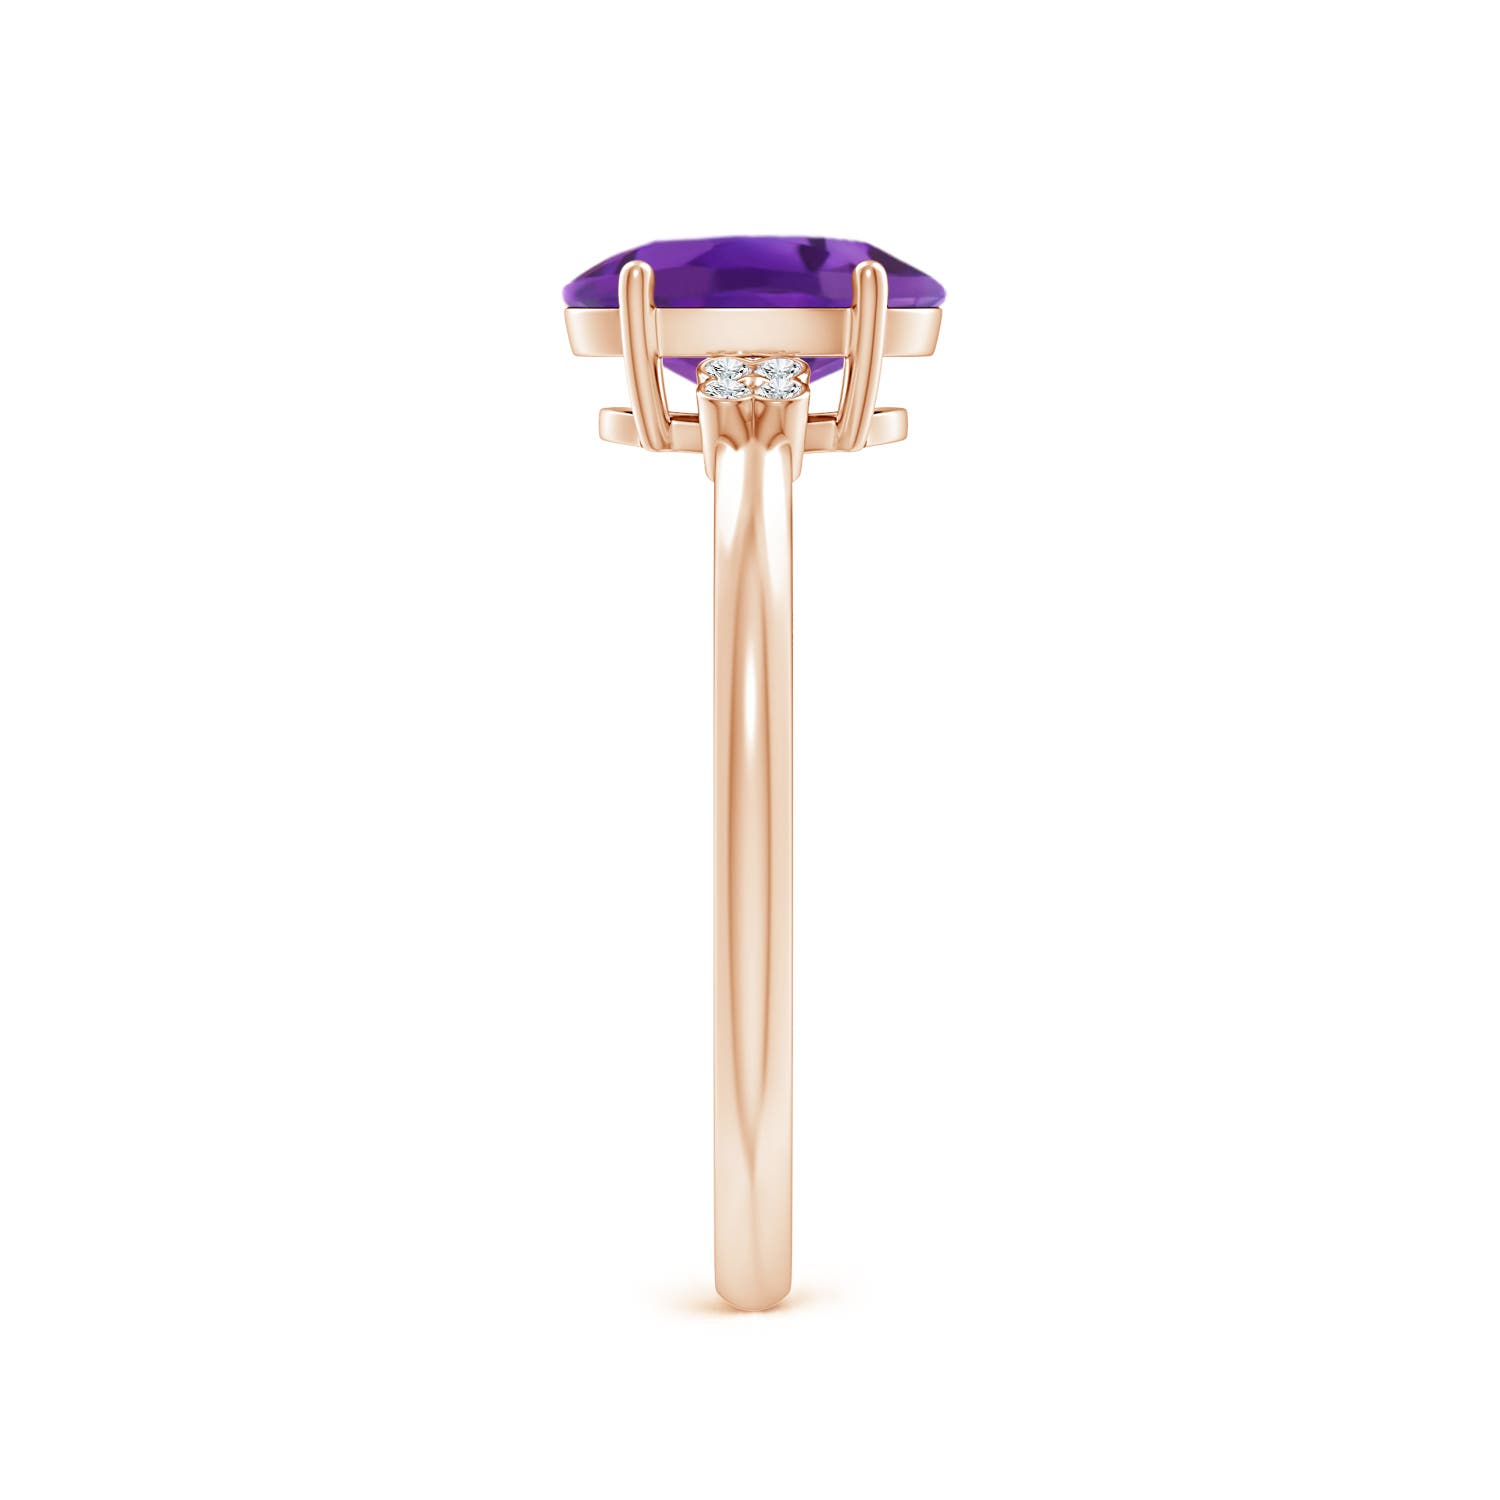 AAA- Amethyst / 1.2 CT / 14 KT Rose Gold